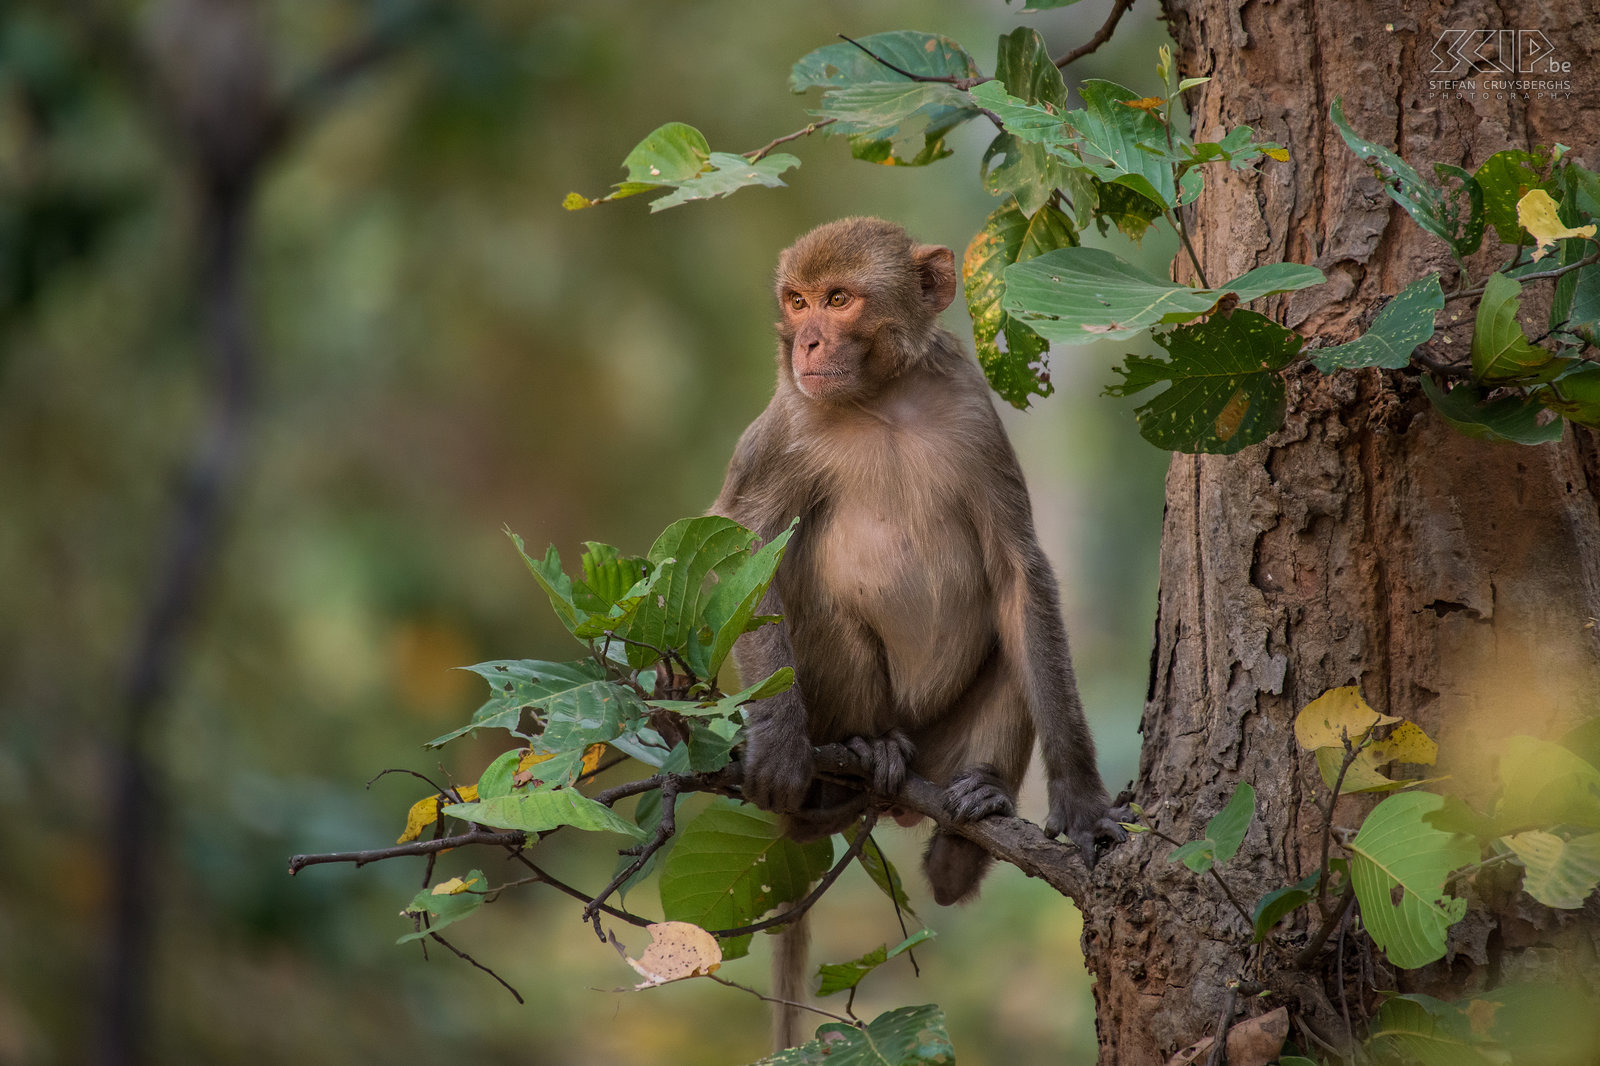 Bandhavgarh - Rhesus macaque The rhesus macaque (Macaca mulatta), also called the rhesus monkey, is quite common in national parks and also in cities in India. Stefan Cruysberghs